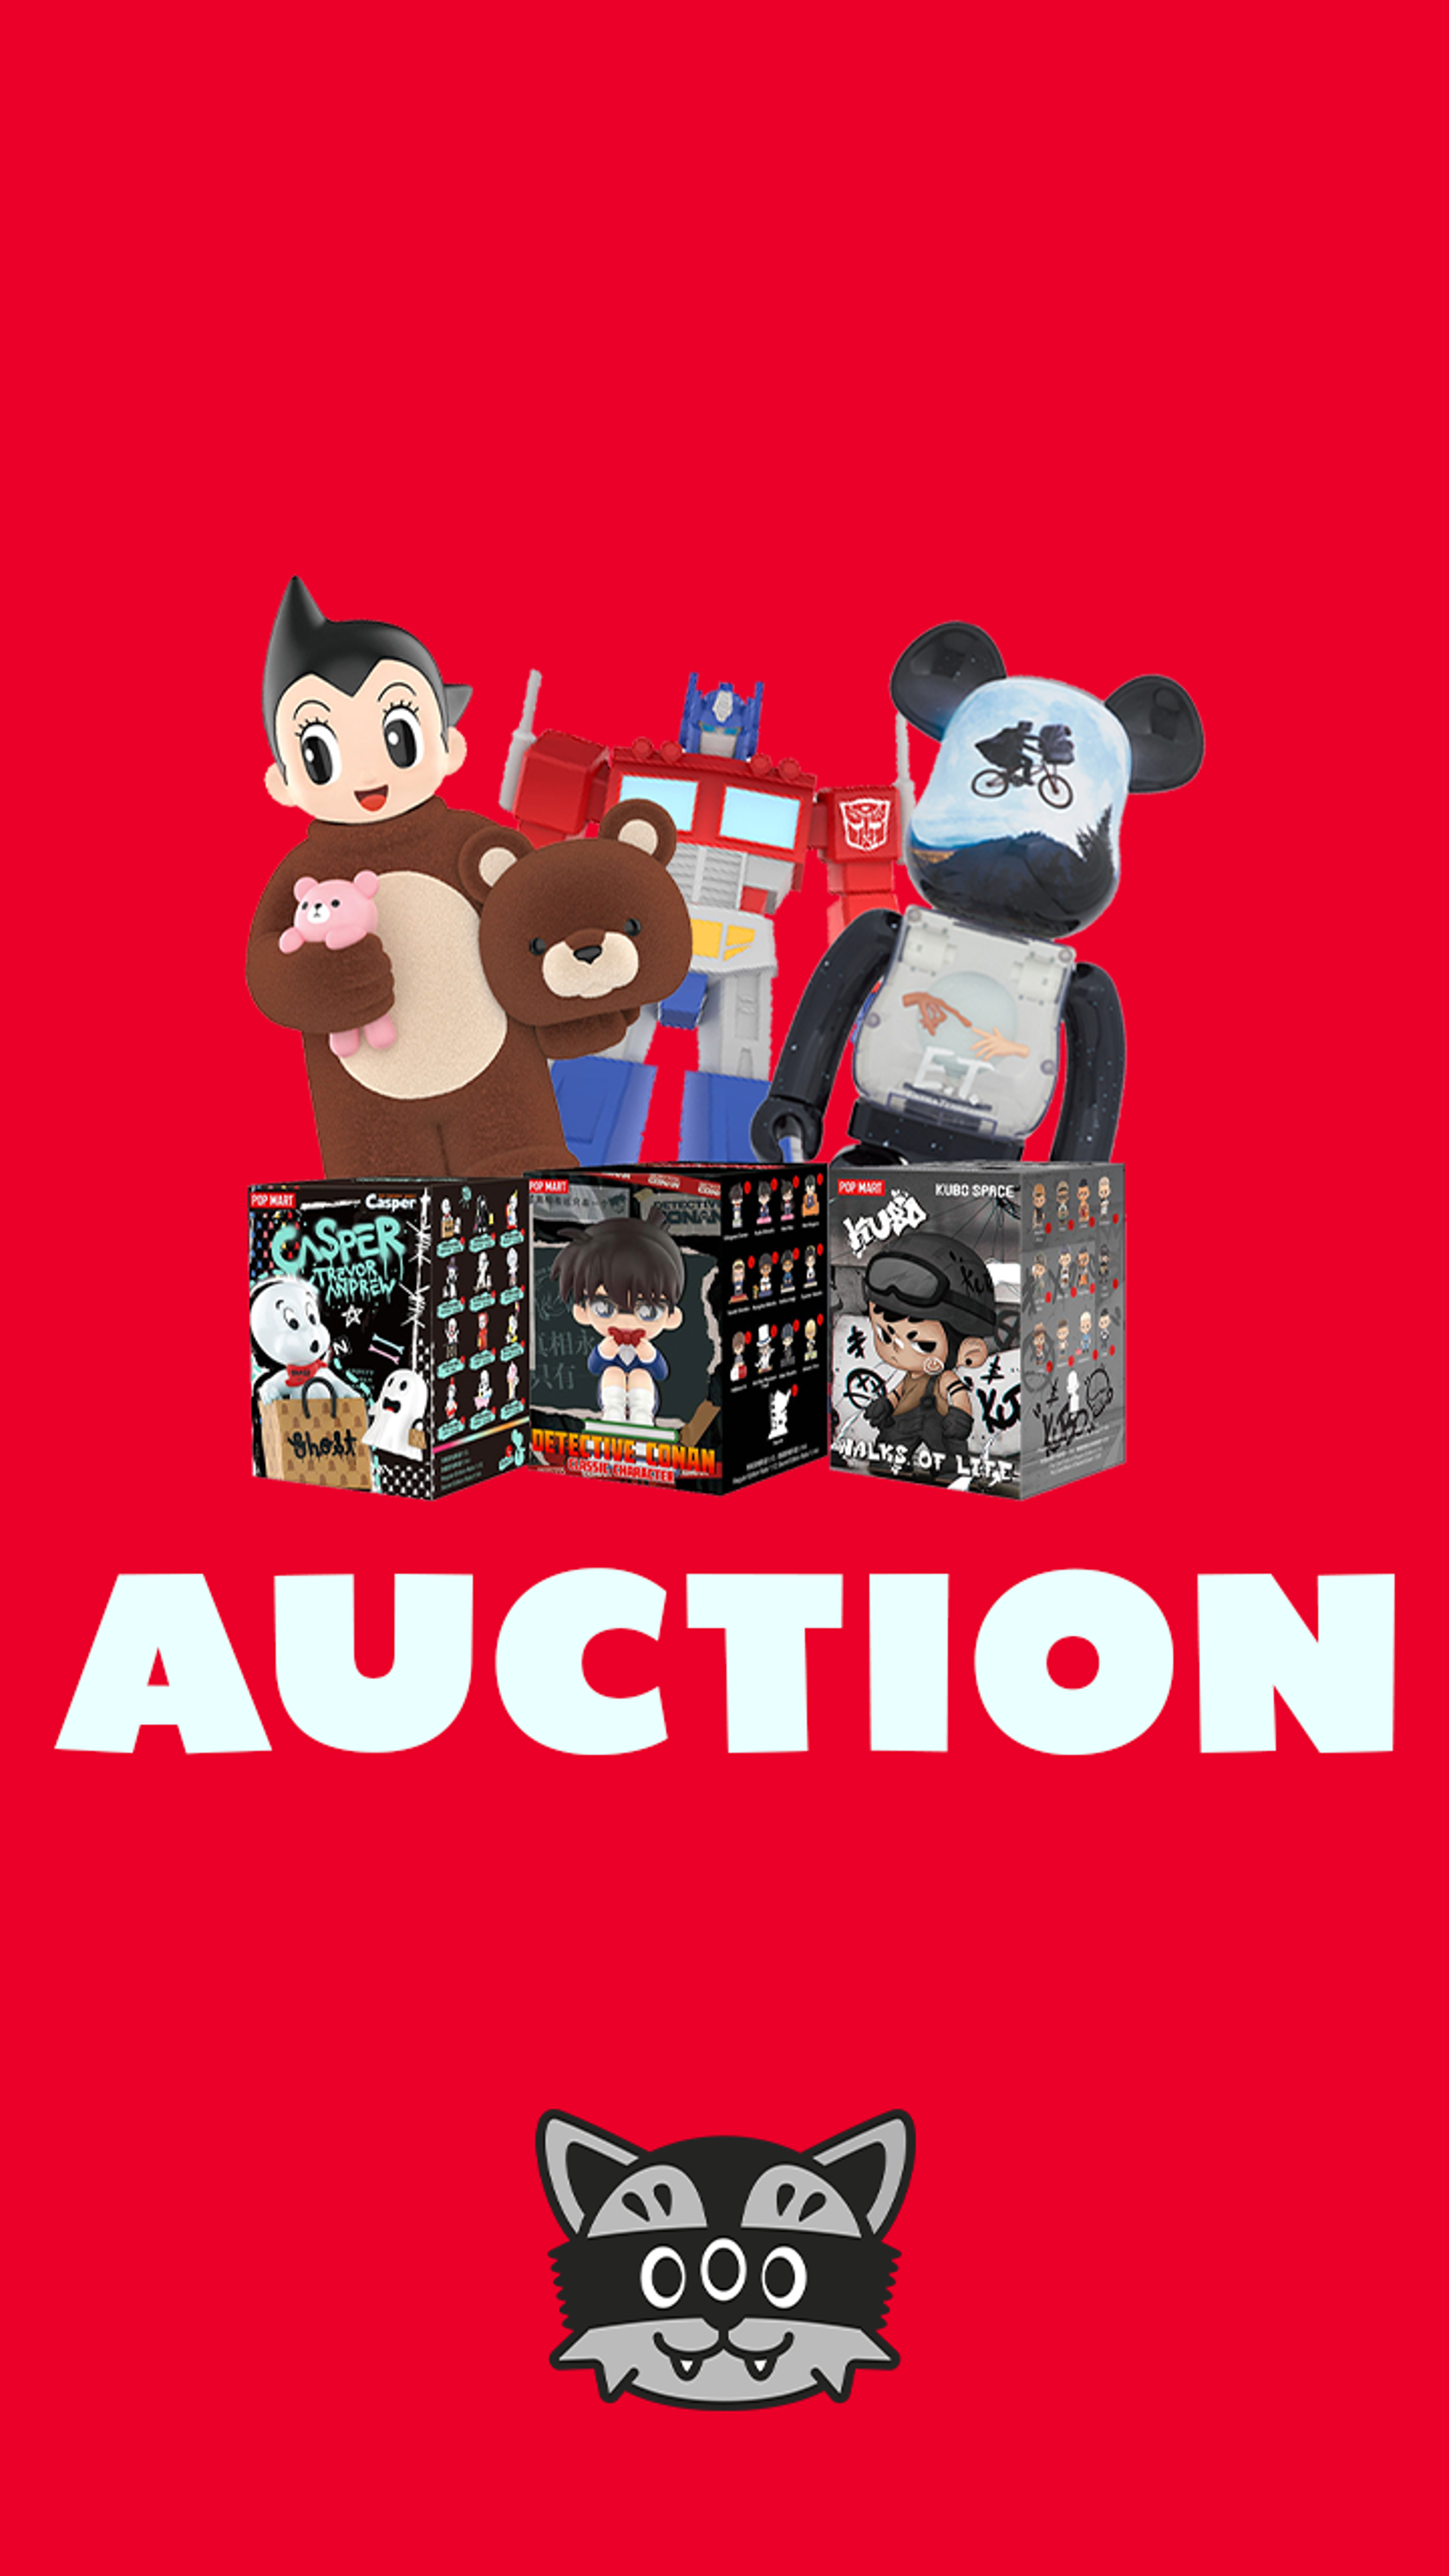 Preview image for the show titled "New Bearbrick Auctions! - Mindzai" at July 26, 2024